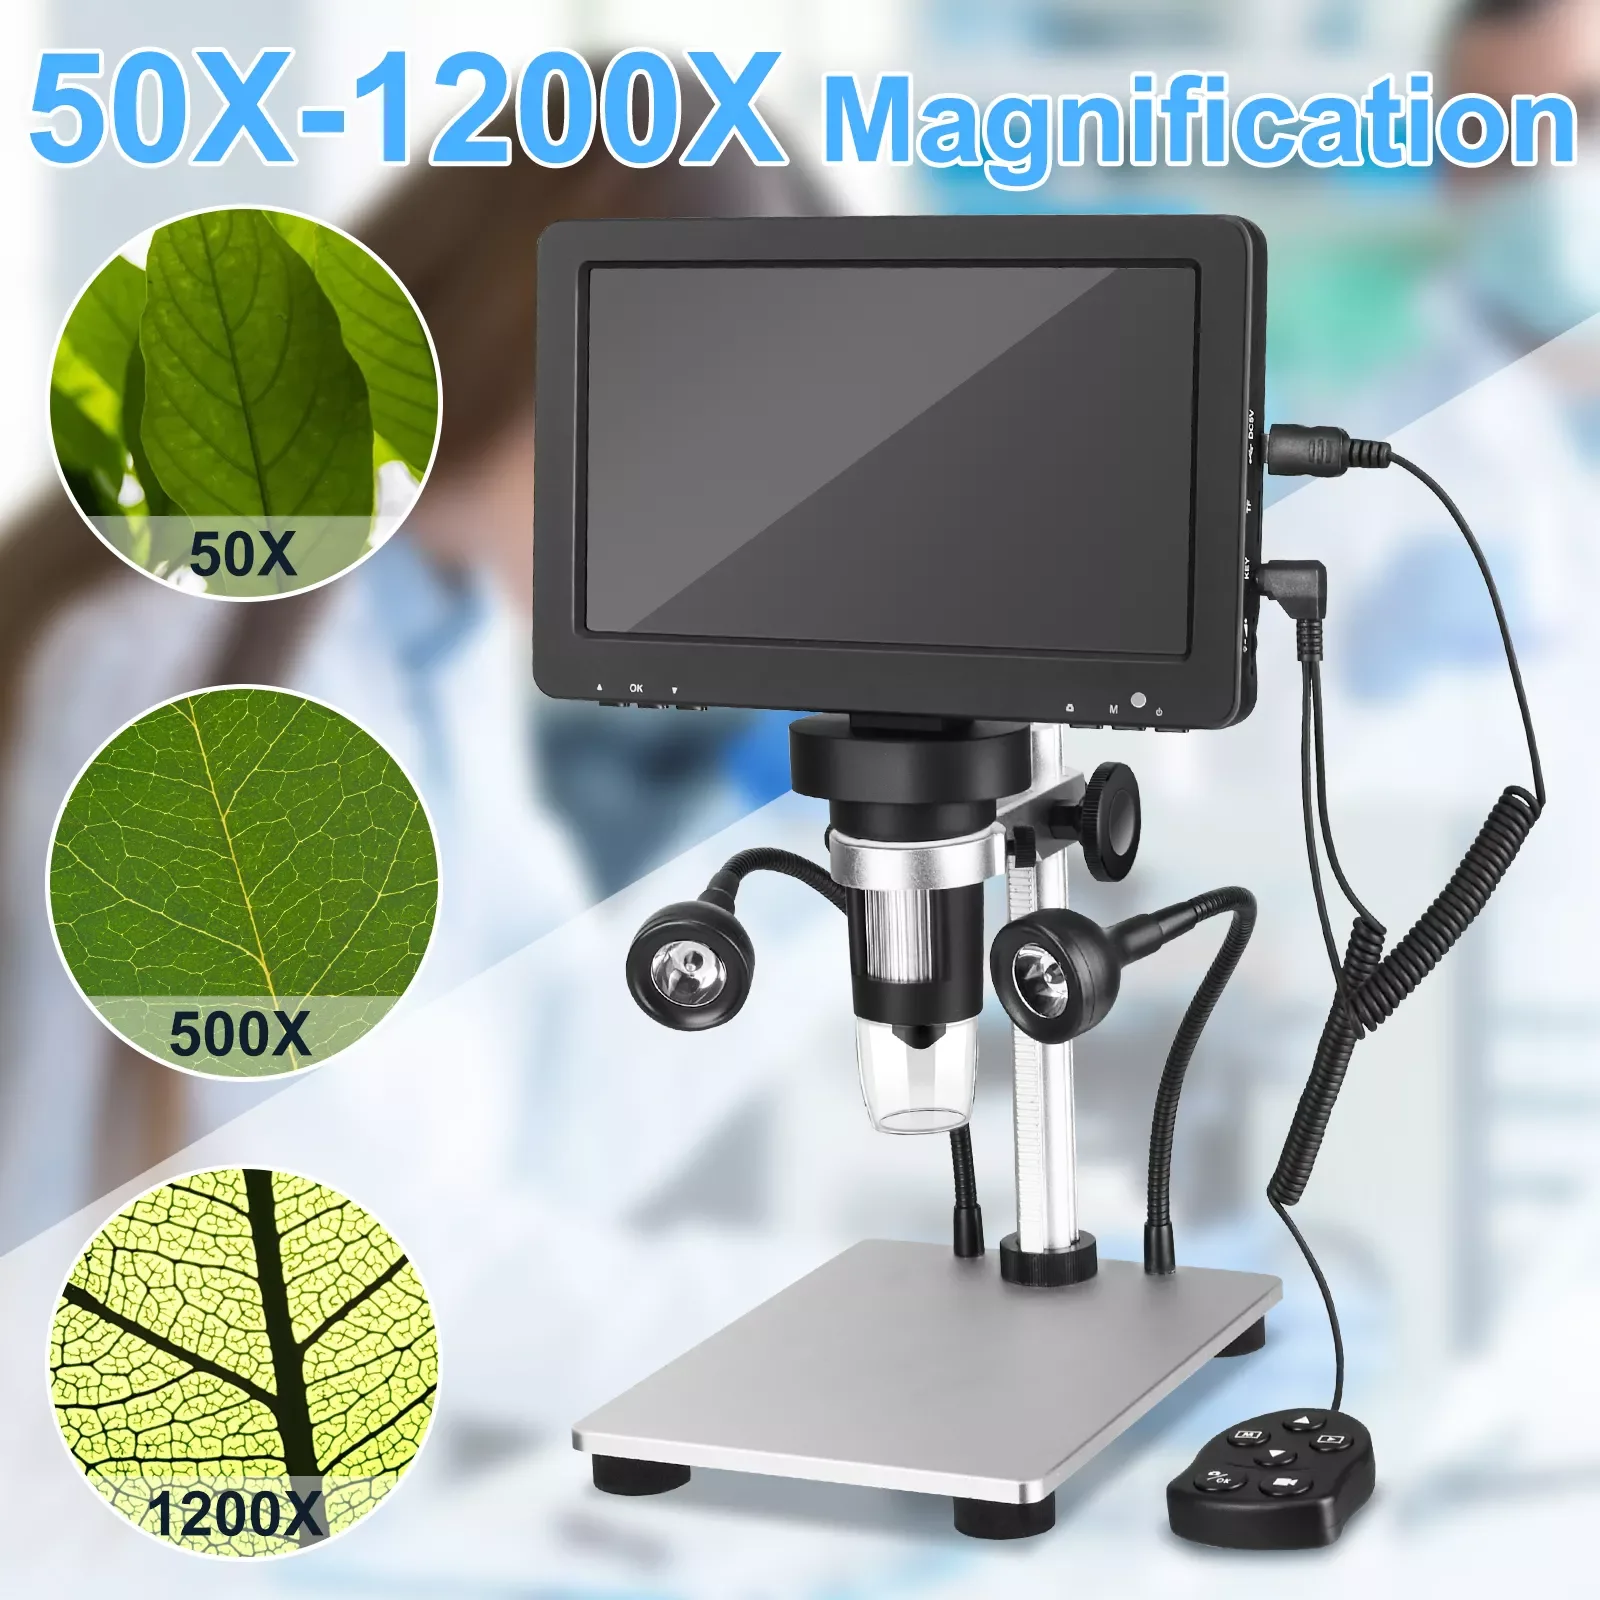 

7 Inch LCD Digital USB Microscope with Wired Remote Control Card, Koolertron 12MP 1-1200X Magnification Camera Video Recorder